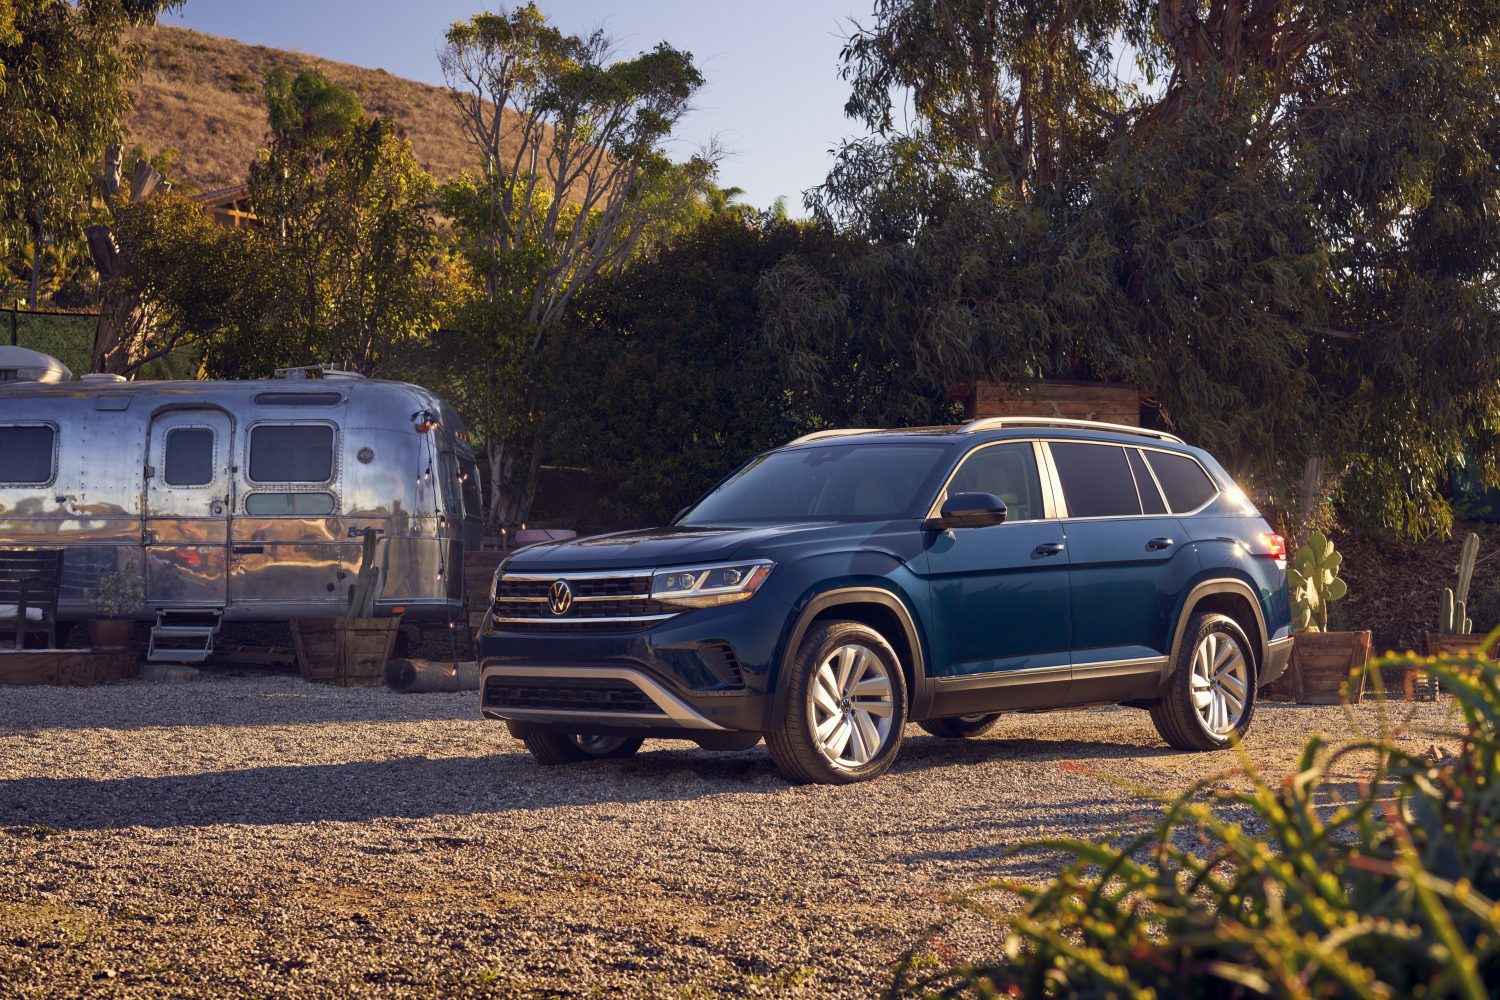 Can The VW Atlas Tow a Camper Trailer?